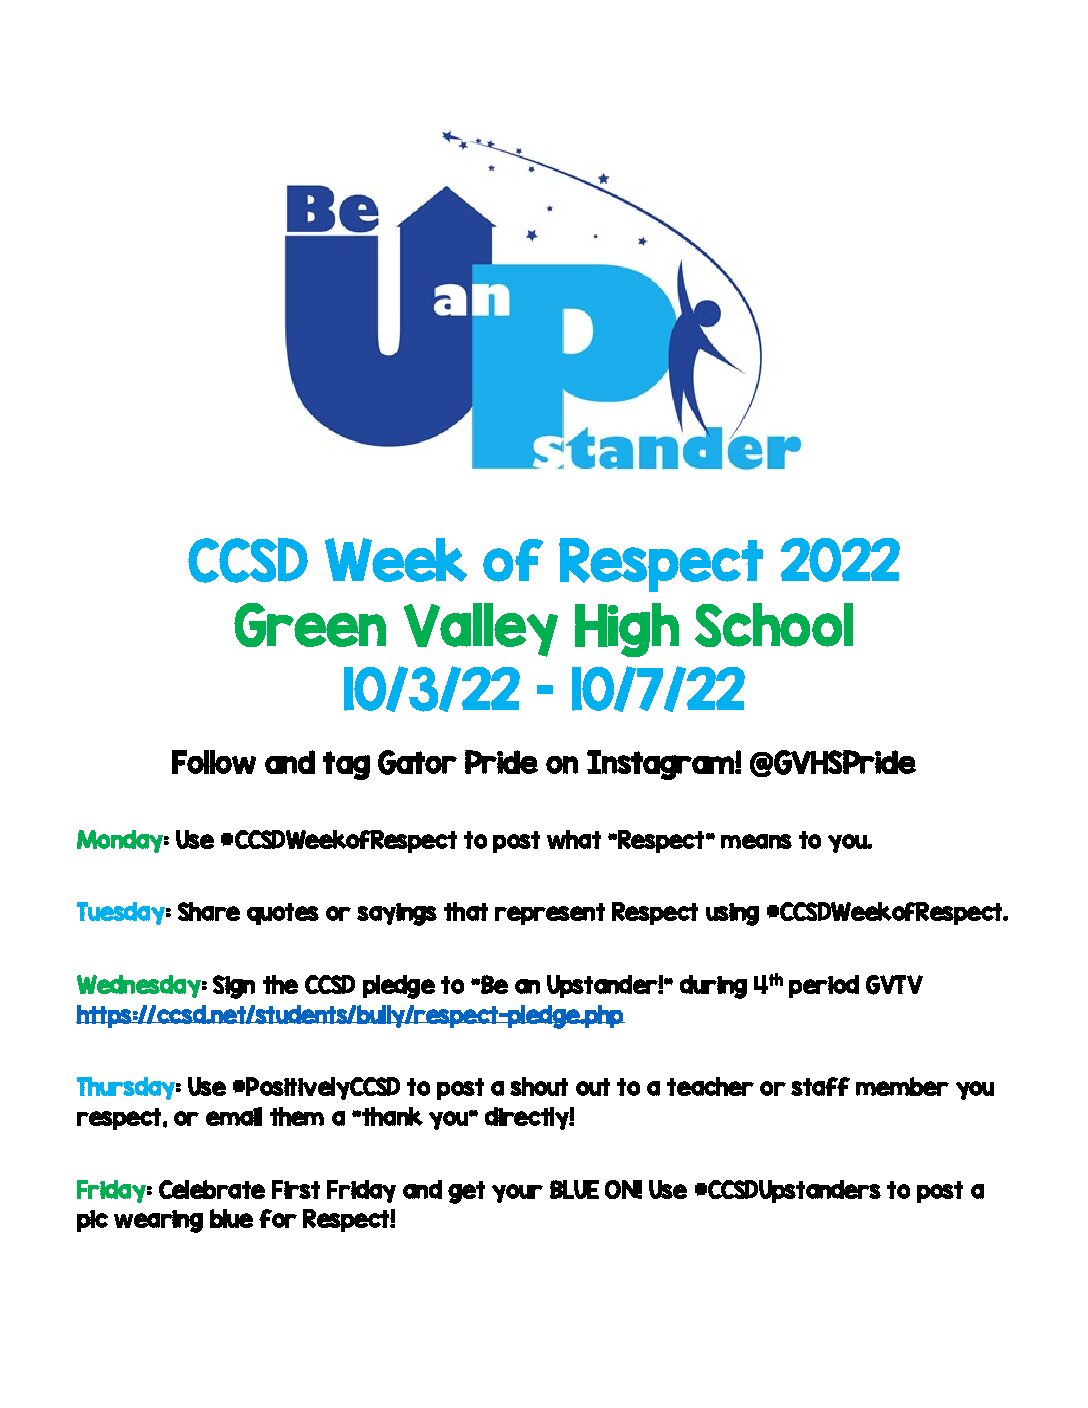 Week of Respect